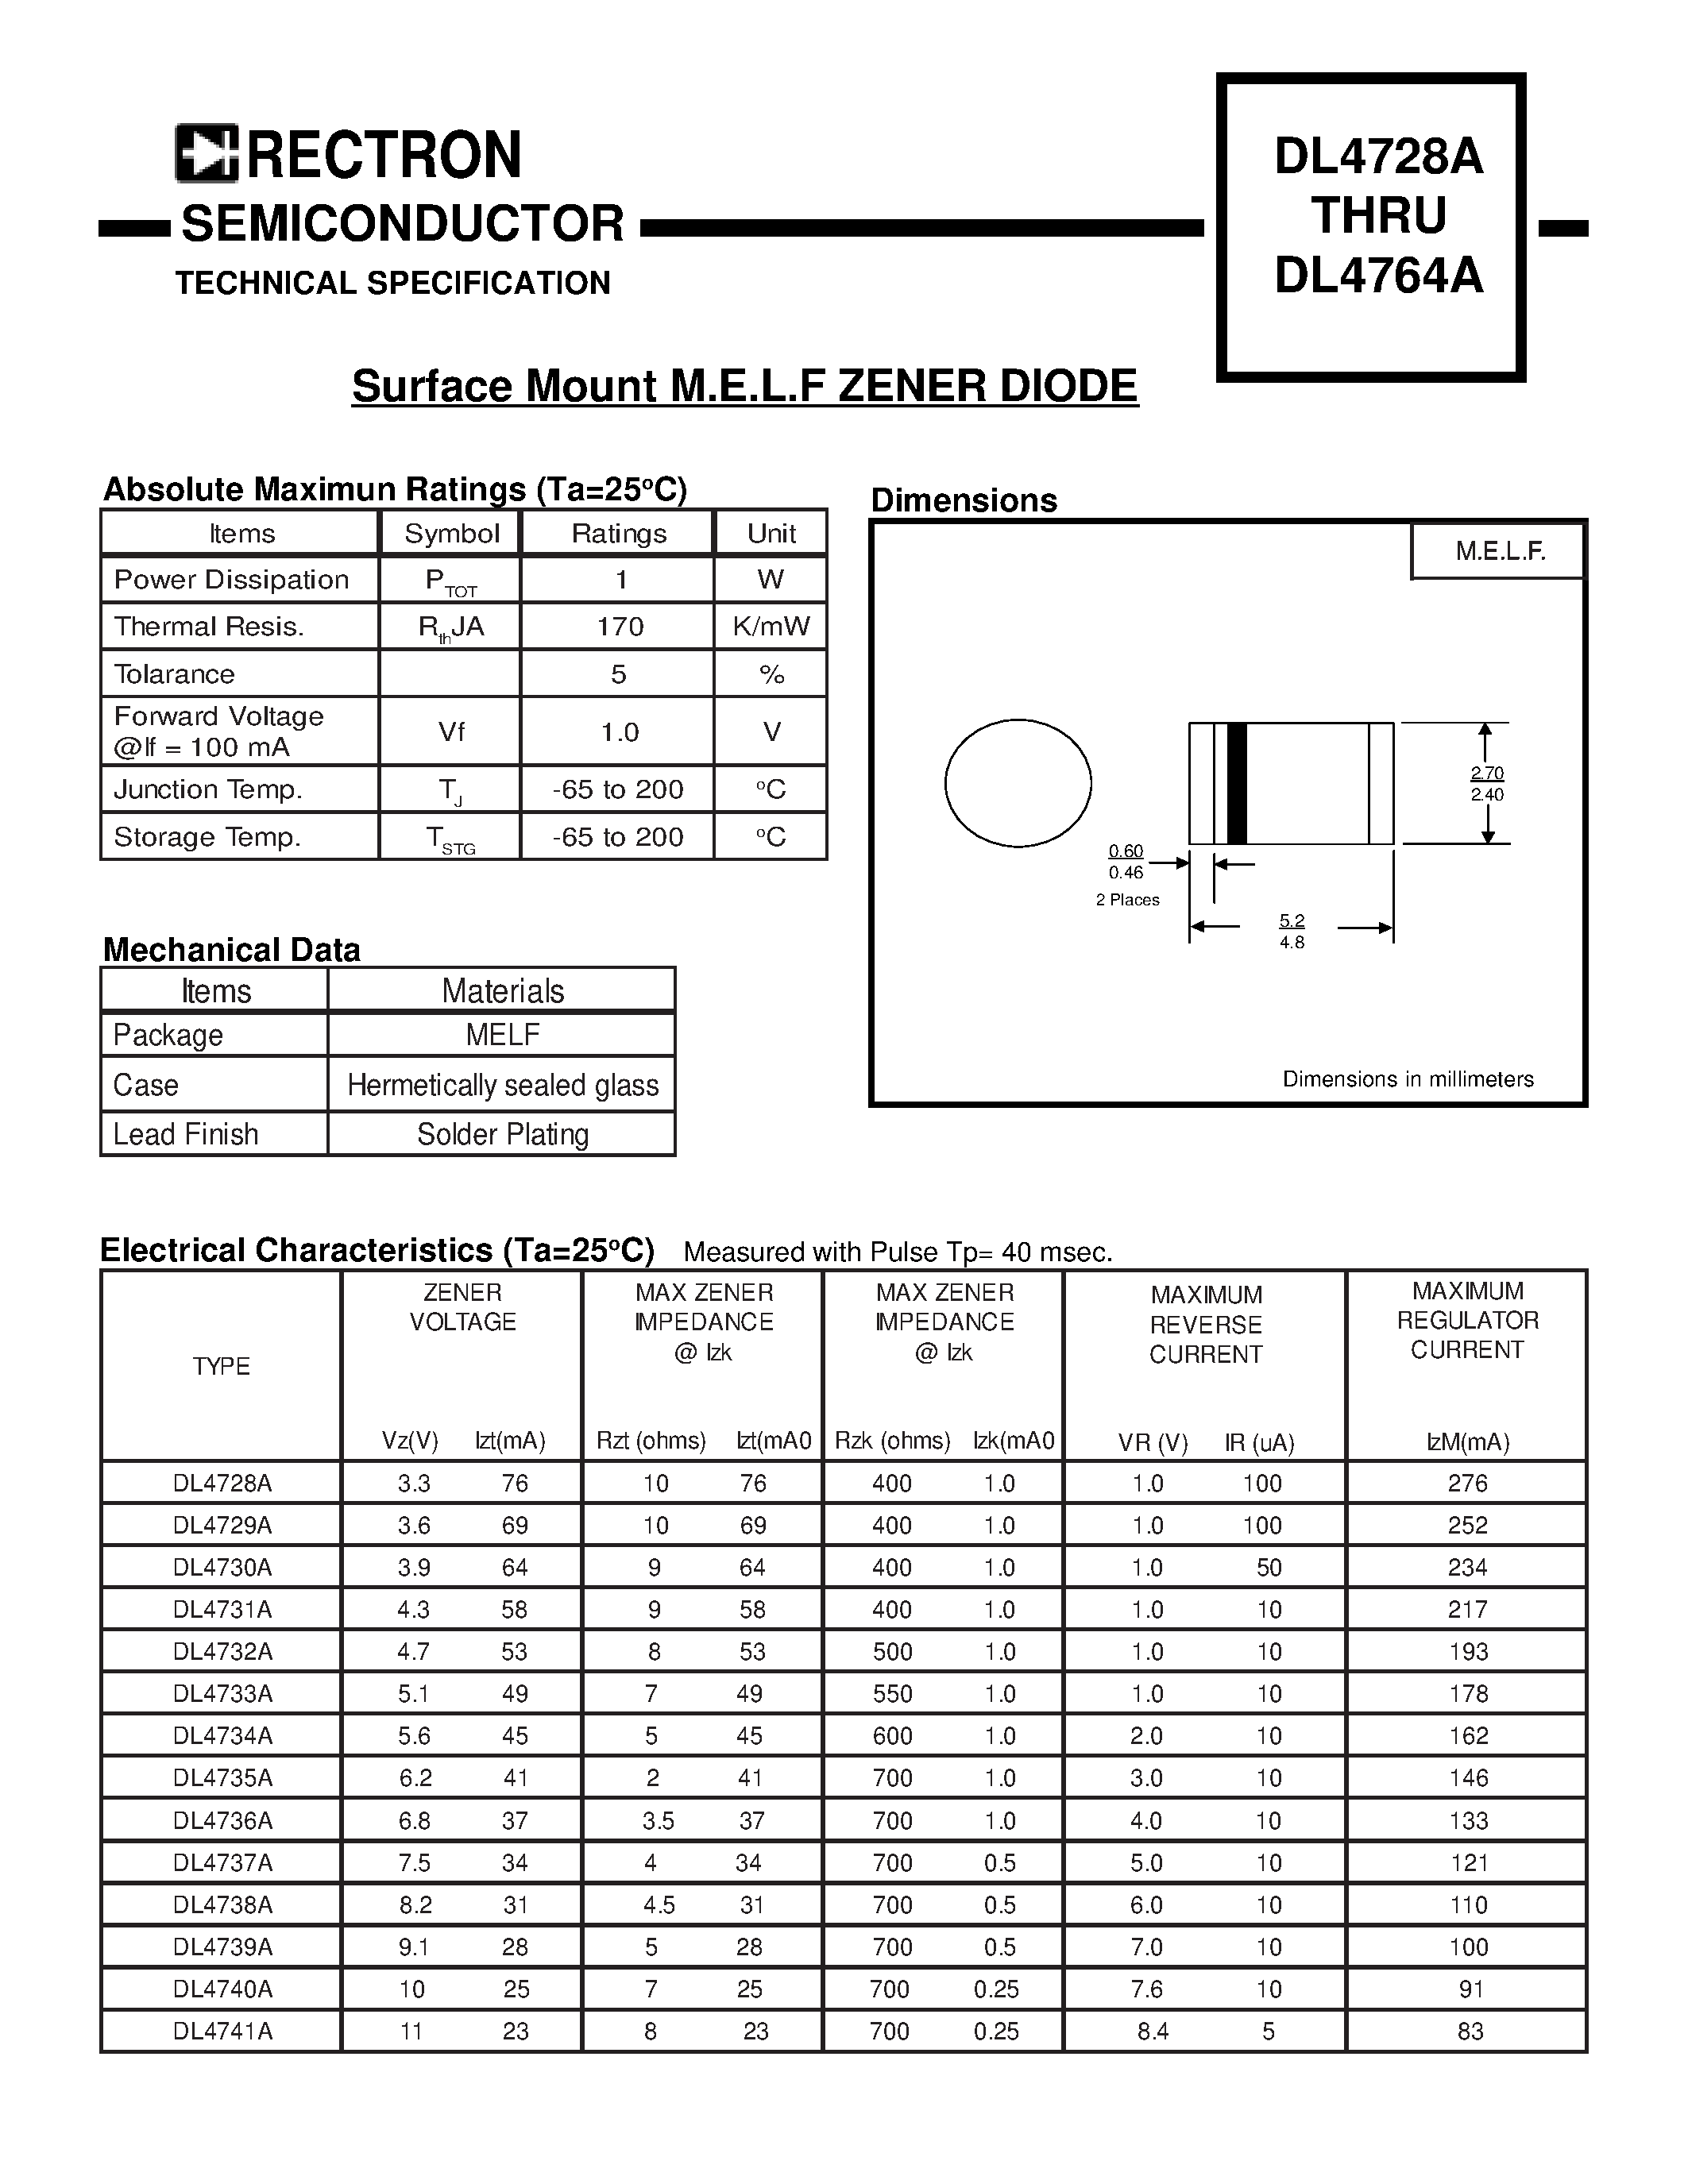 Datasheet DL4751A - Surface Mount M.E.L.F ZENER DIODE page 1